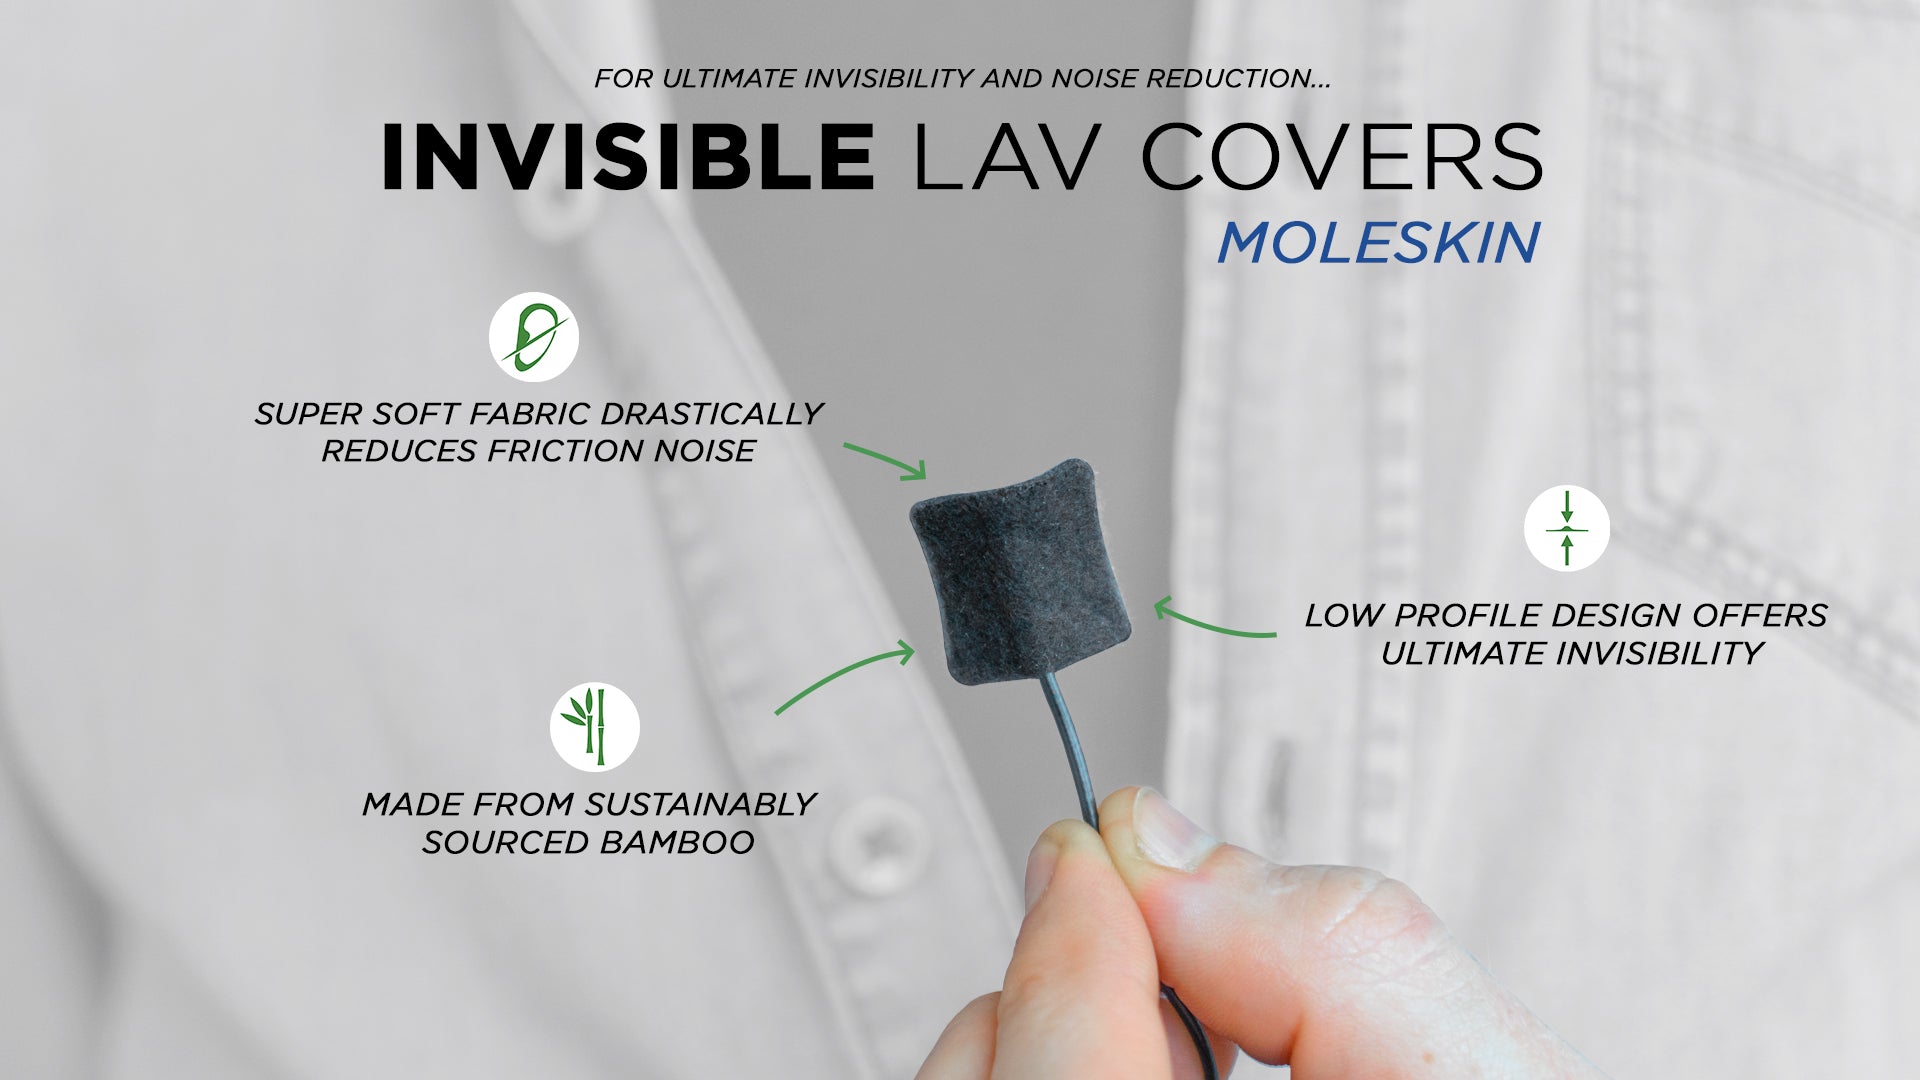 The Invisible Lav Covers - Moleskin infographic